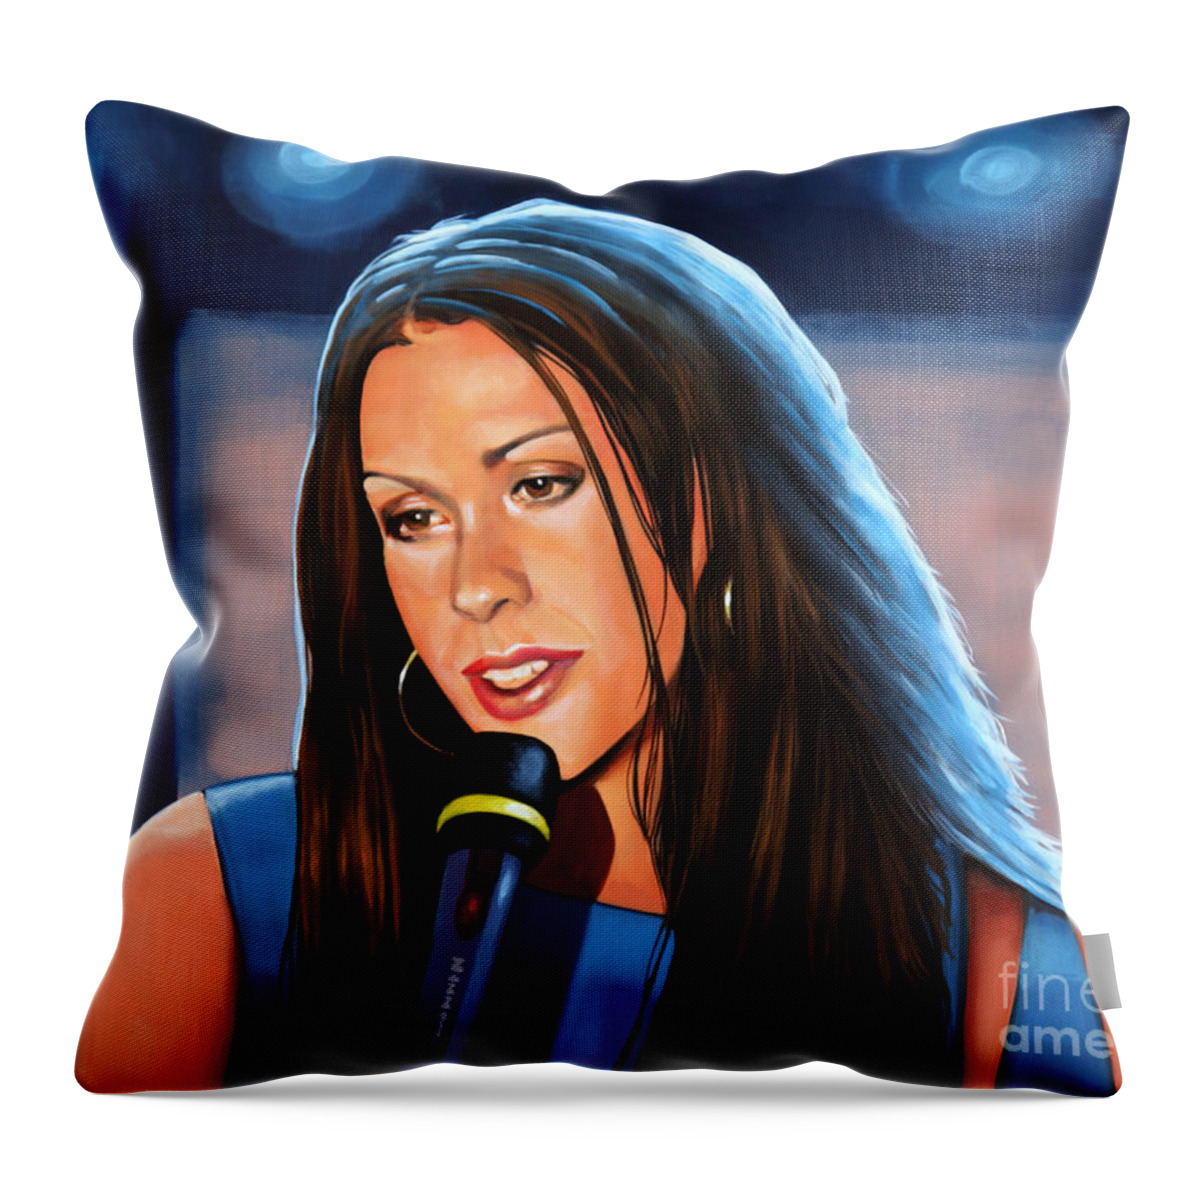 Alanis Morissette Throw Pillow featuring the painting Alanis Morissette by Paul Meijering